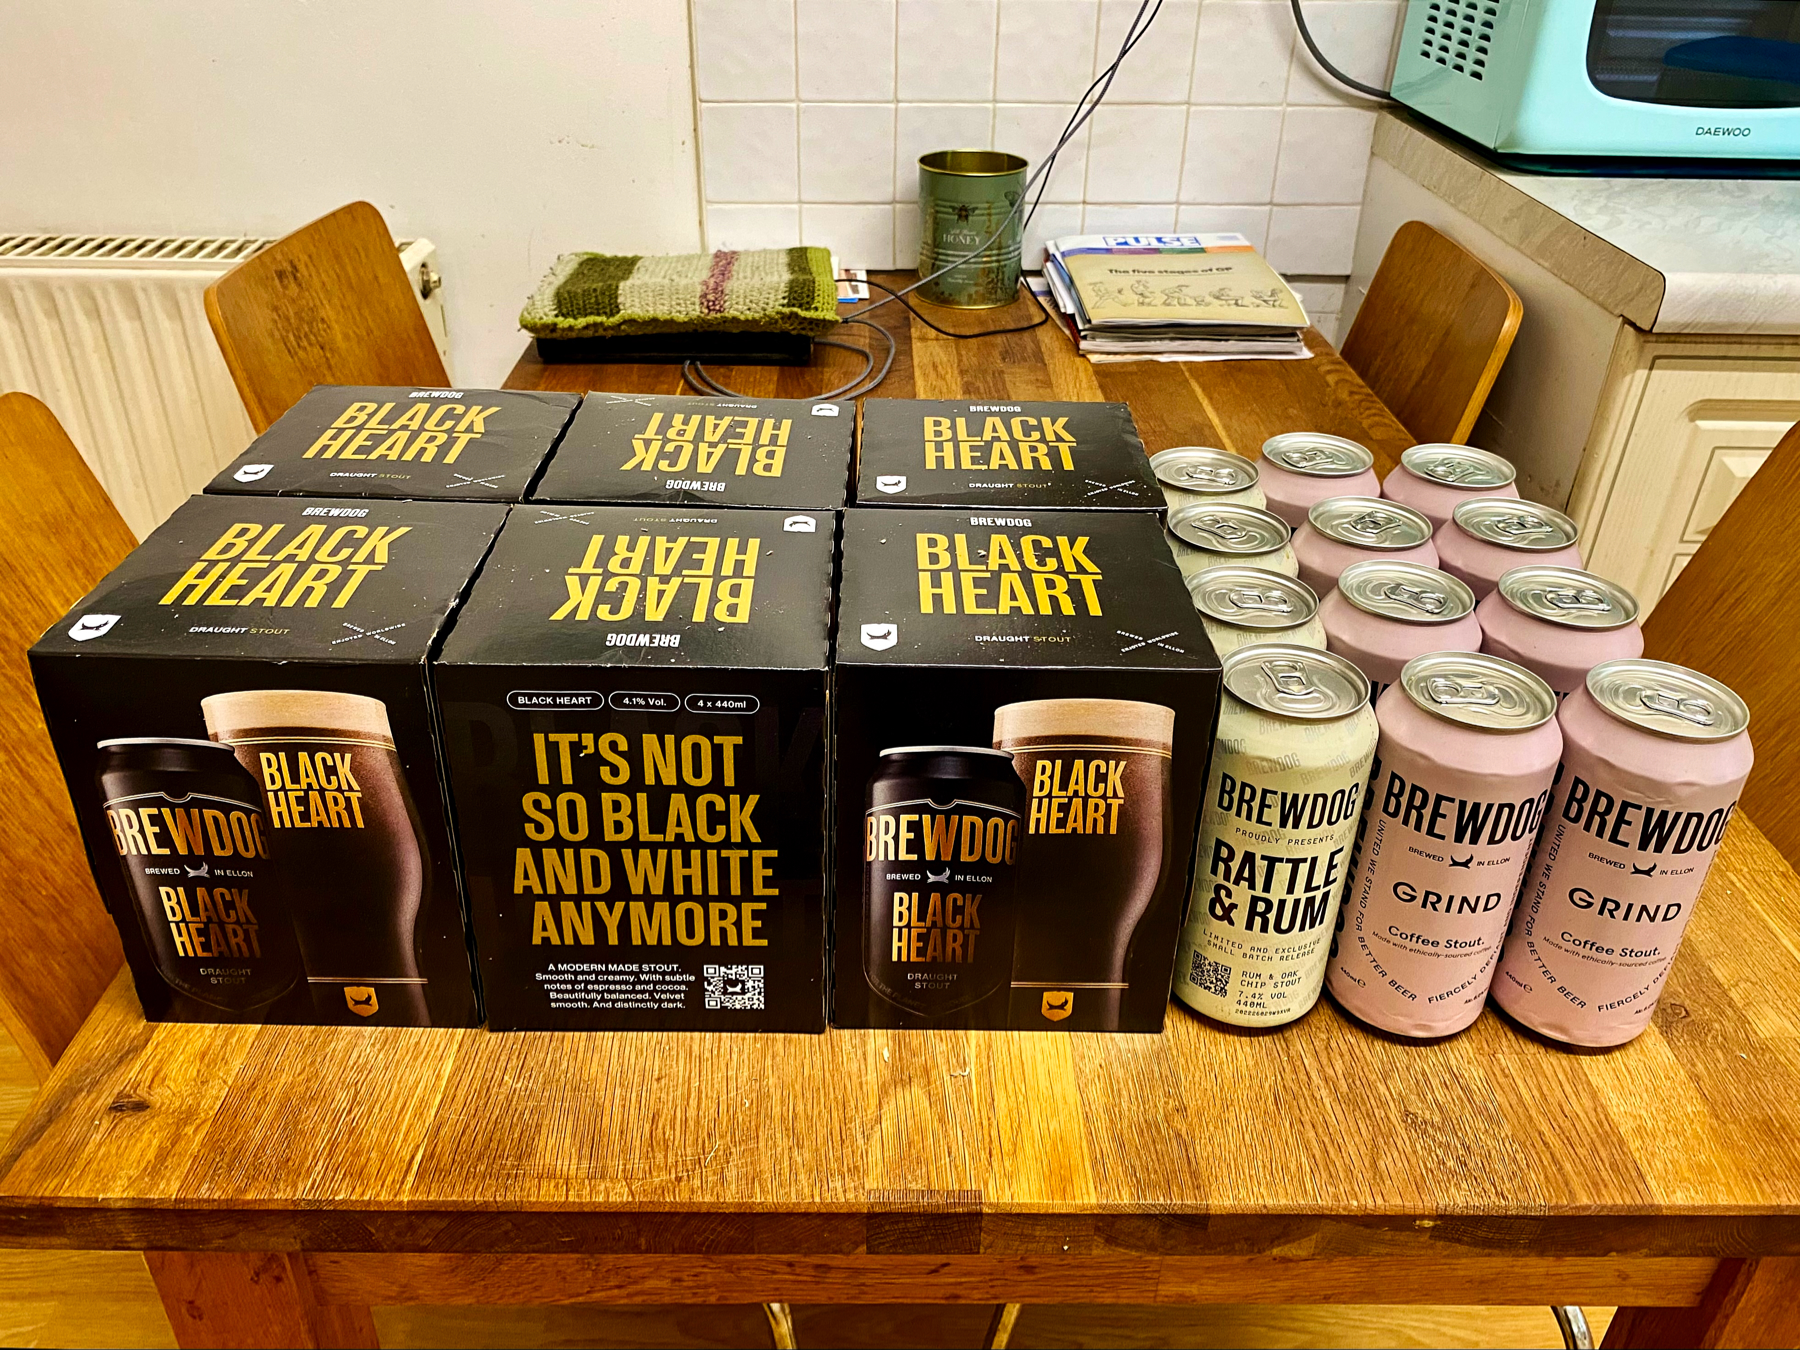 Boxed packs and cans of beer on a wooden table. Boxes show a picture of a glass of dark beer, cans are black, cream and pink